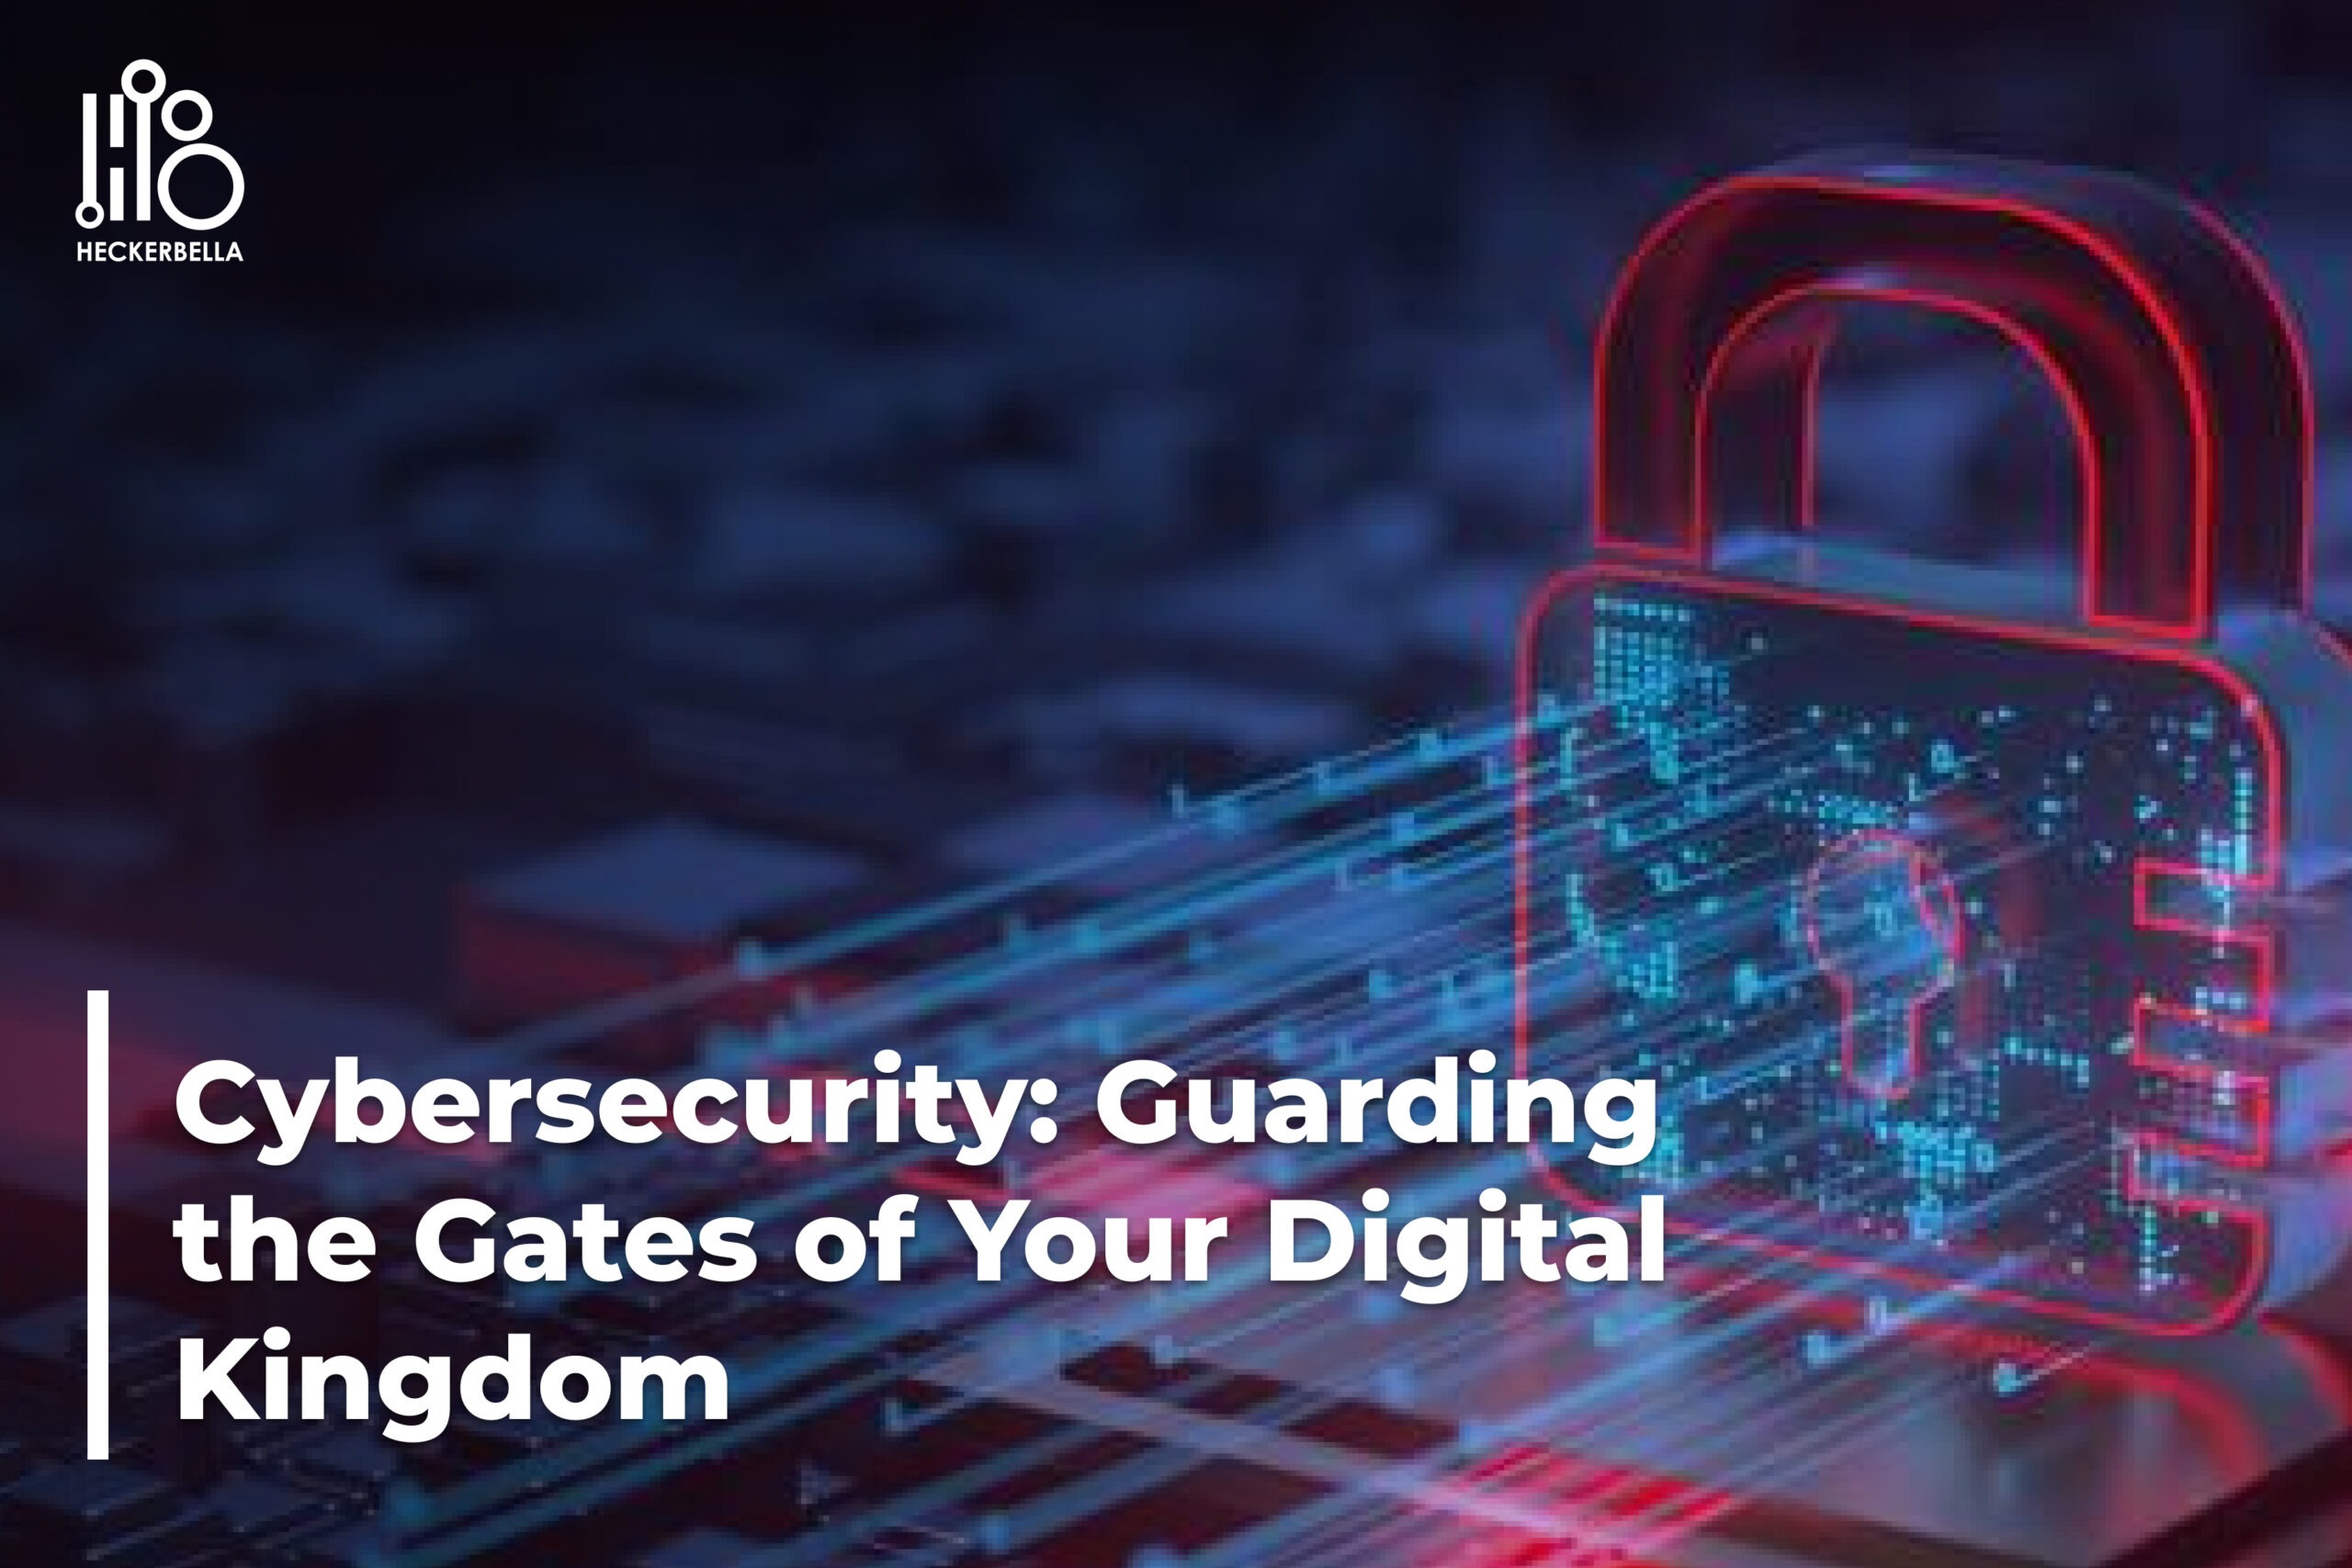 Cybersecurity: Guarding the Gates of Your Digital Kingdom